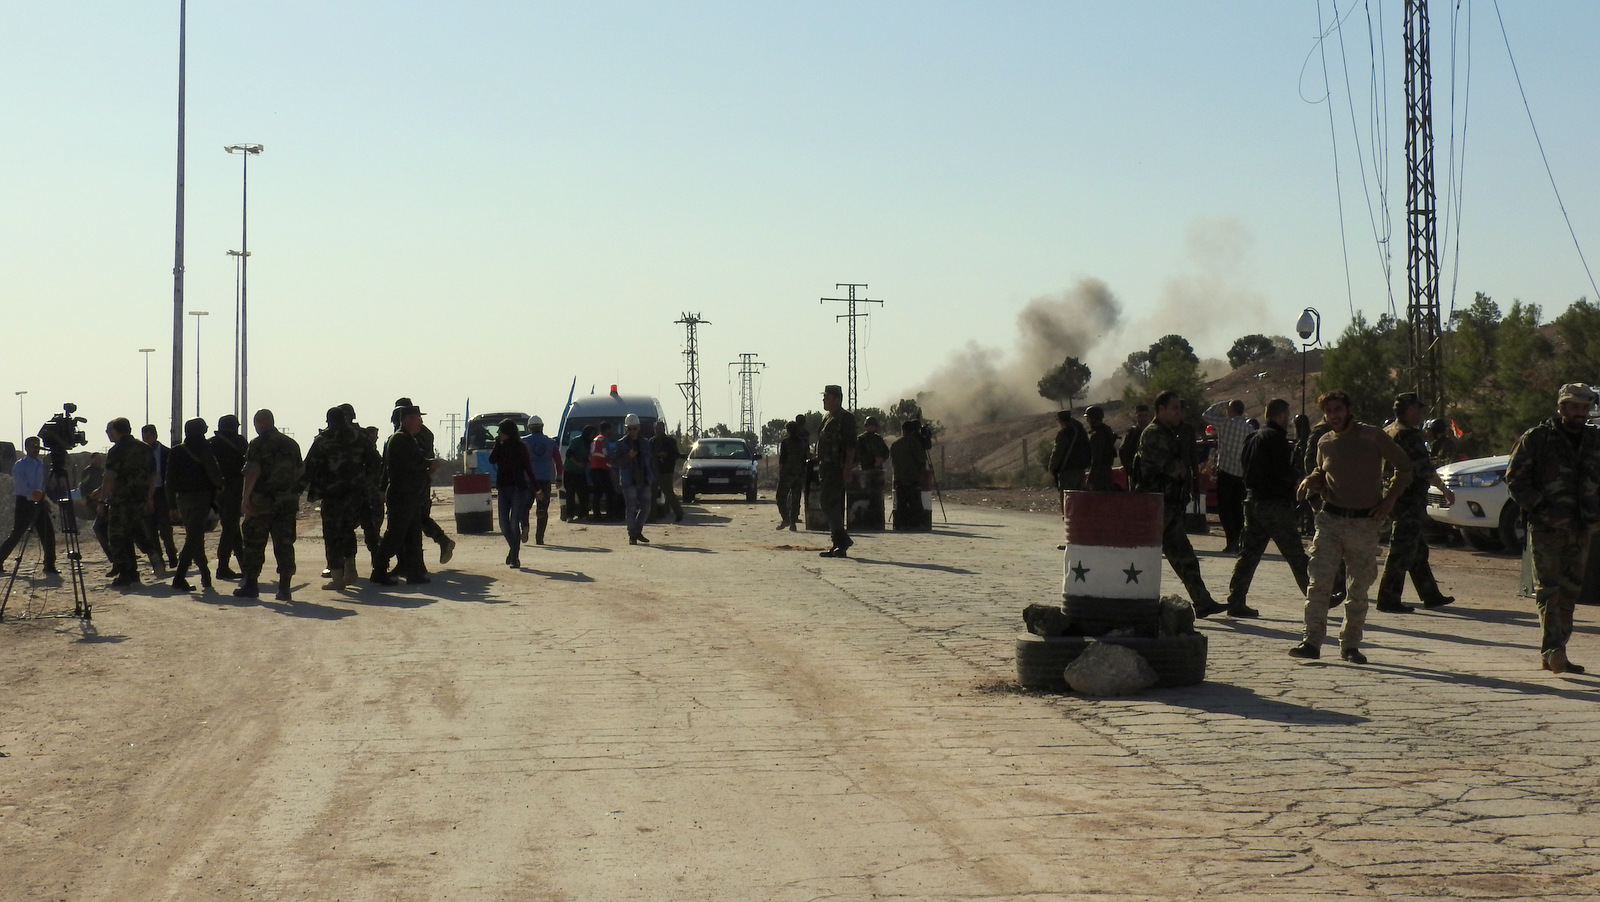 Less than 100 metres away, the second of two mortars fired by terrorist factions less than 1 km from Castello Road on Nov. 4. The road and humanitarian corridor were targeted at least six times that day by terrorist factions. Nov. 4, 2016. (Photo: Eva Bartlett)